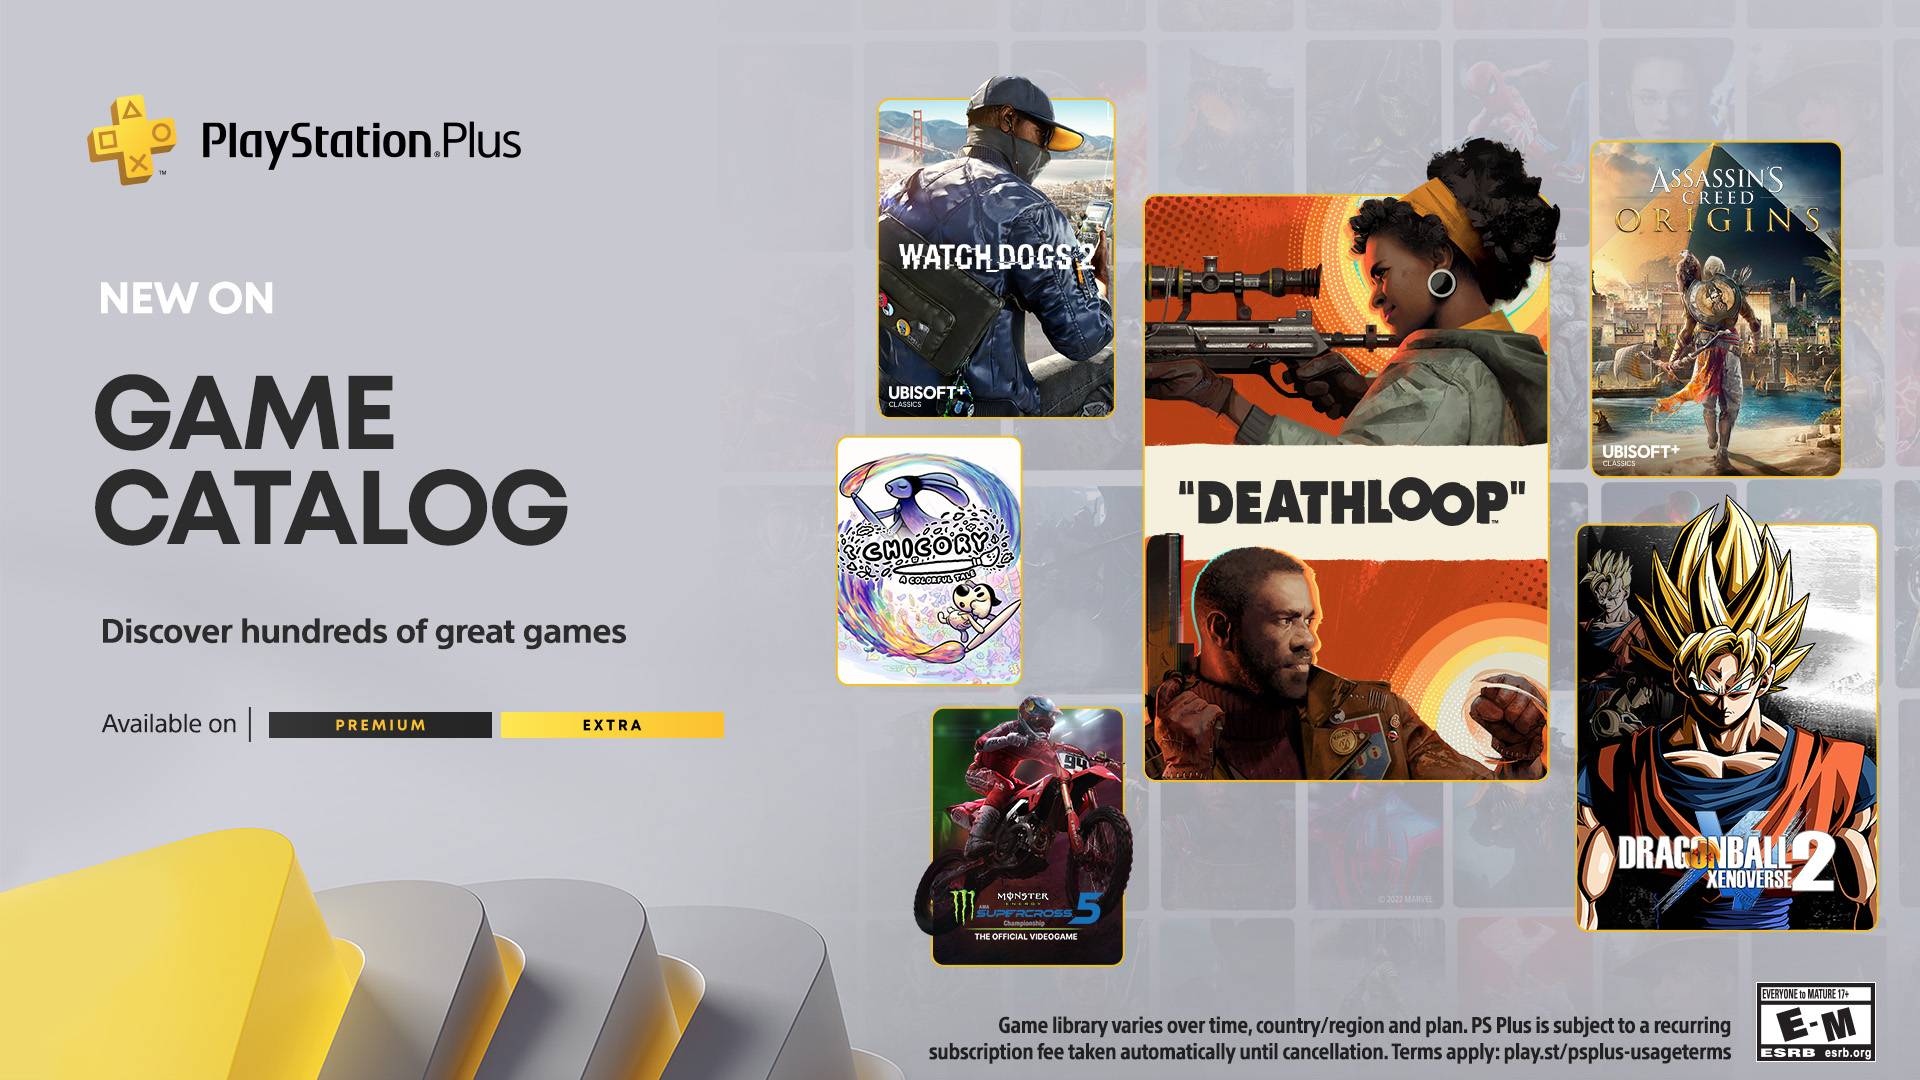 Xbox Game Pass Lineup for September 2022 Revealed: Deathloop